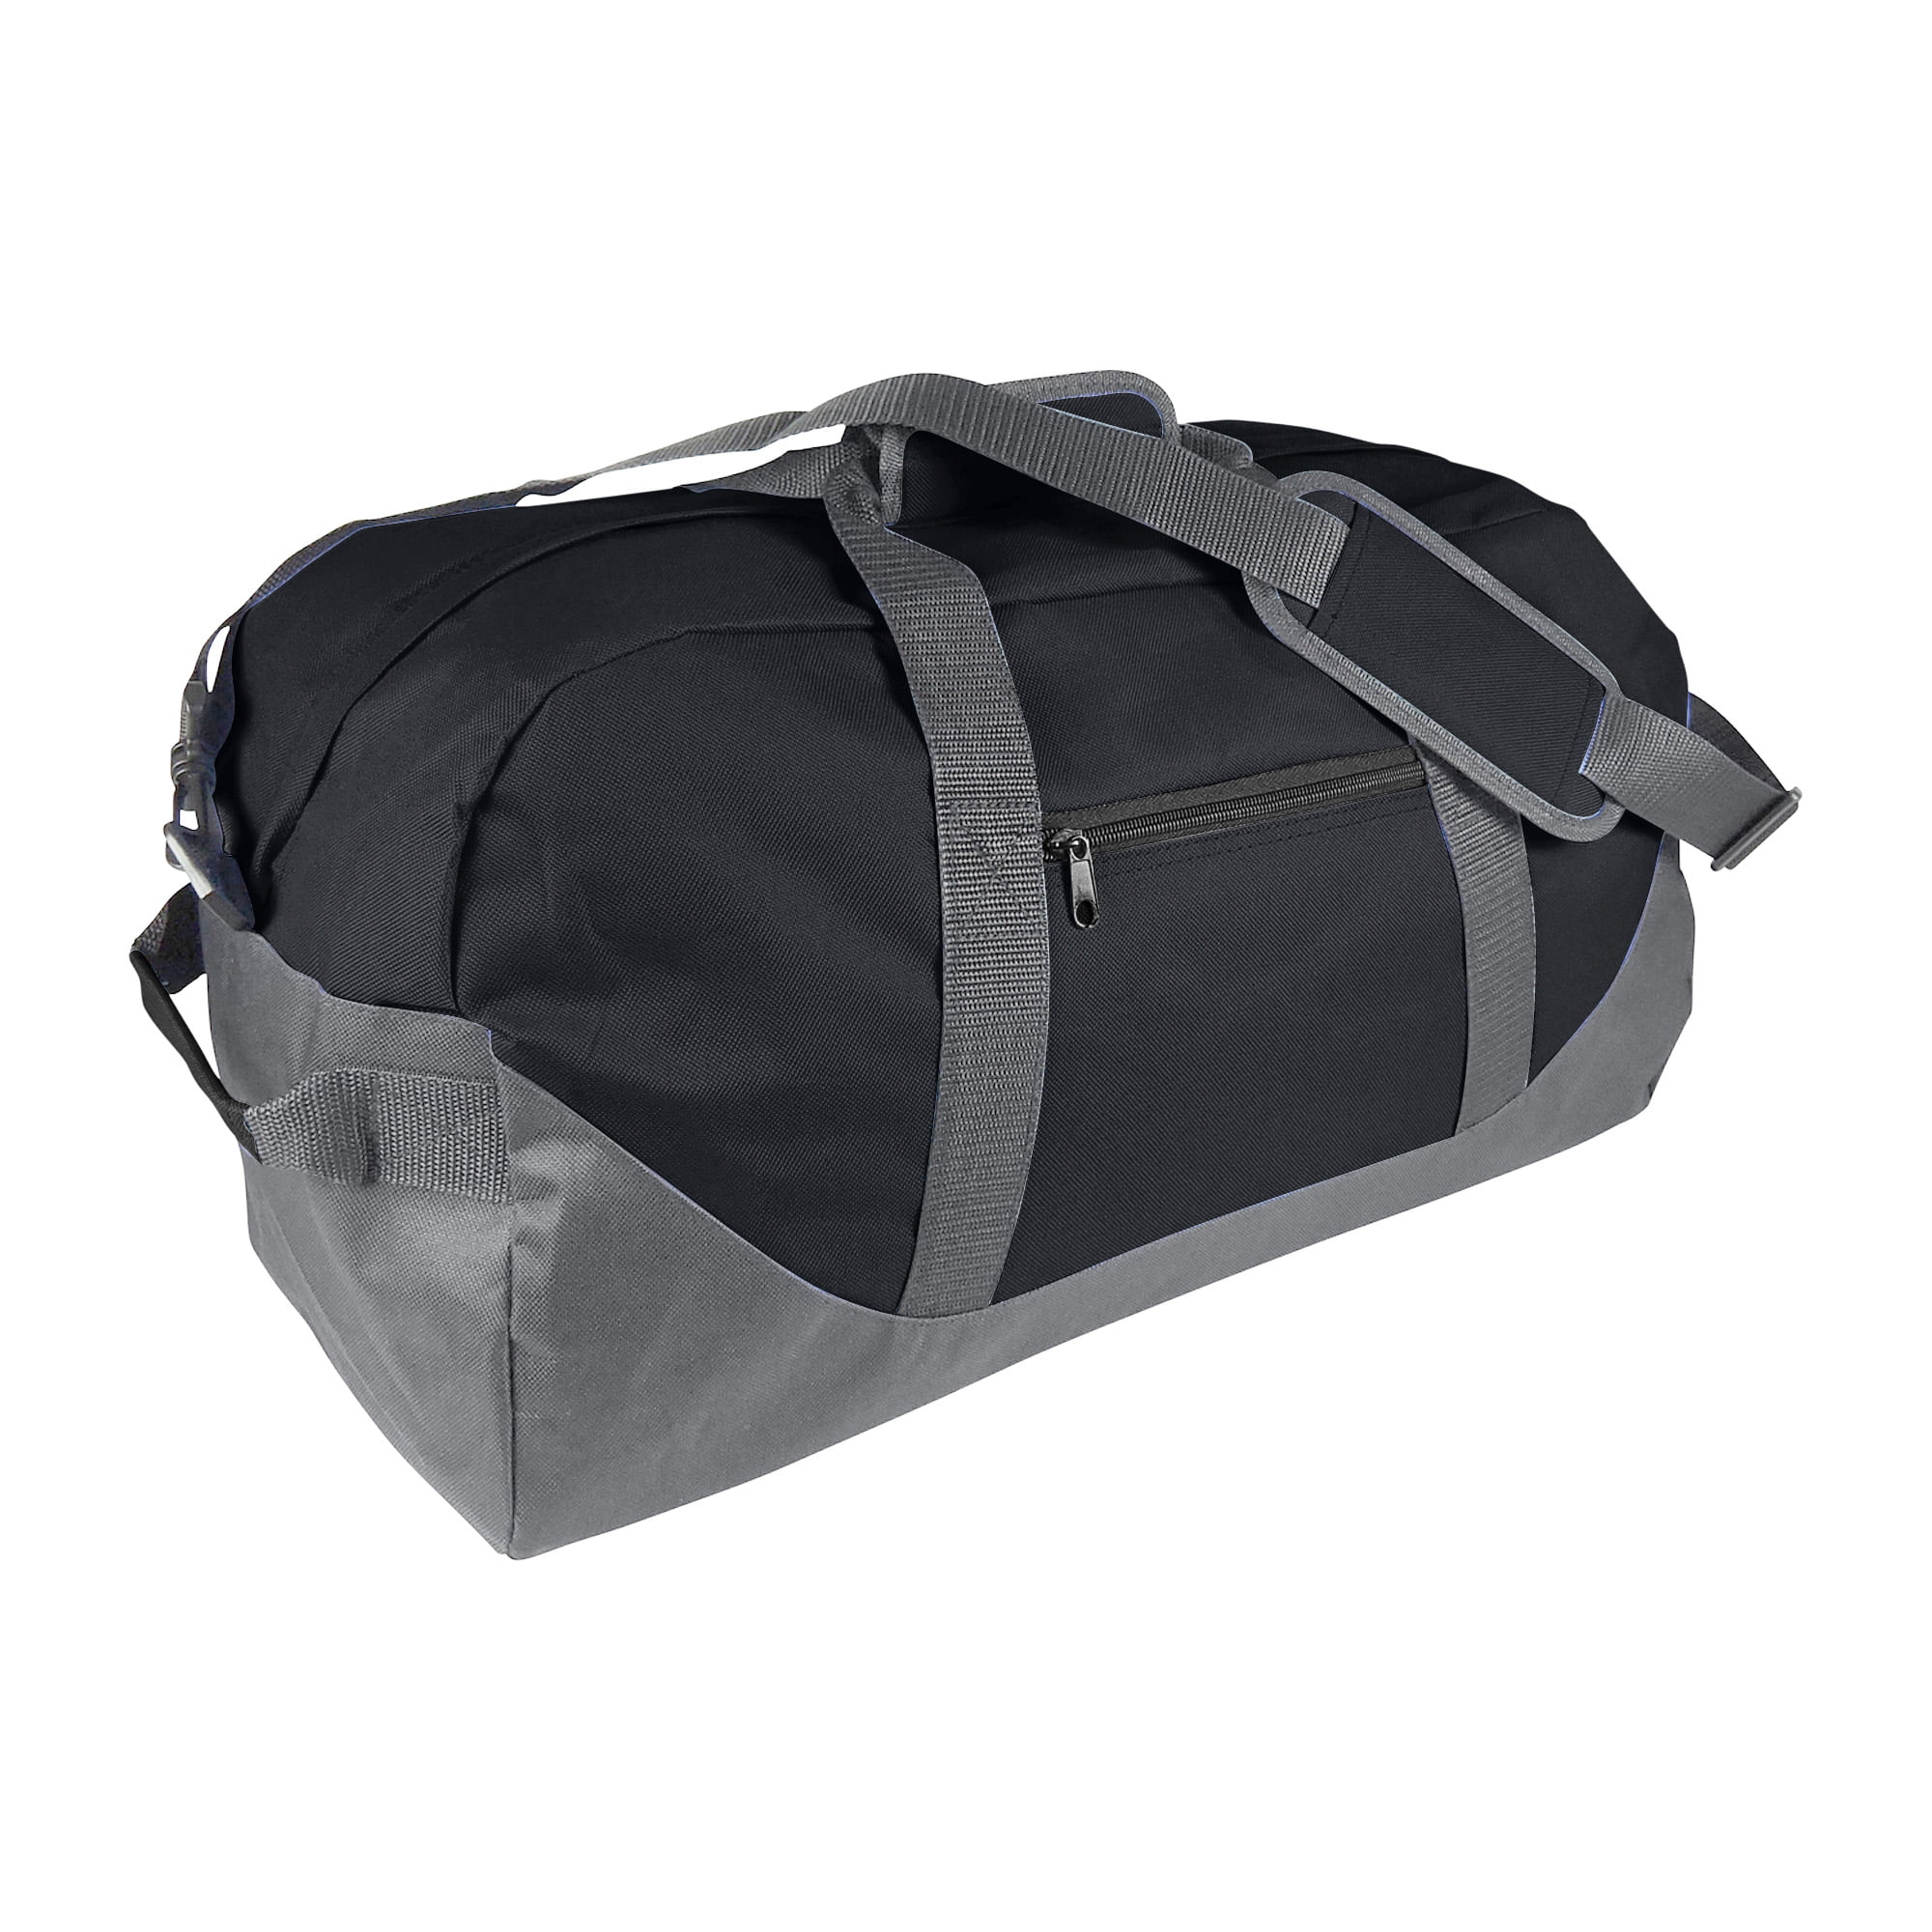 21 Large Duffle Bag with Adjustable Strap in Black and Gray - www.waldenwongart.com - www.waldenwongart.com